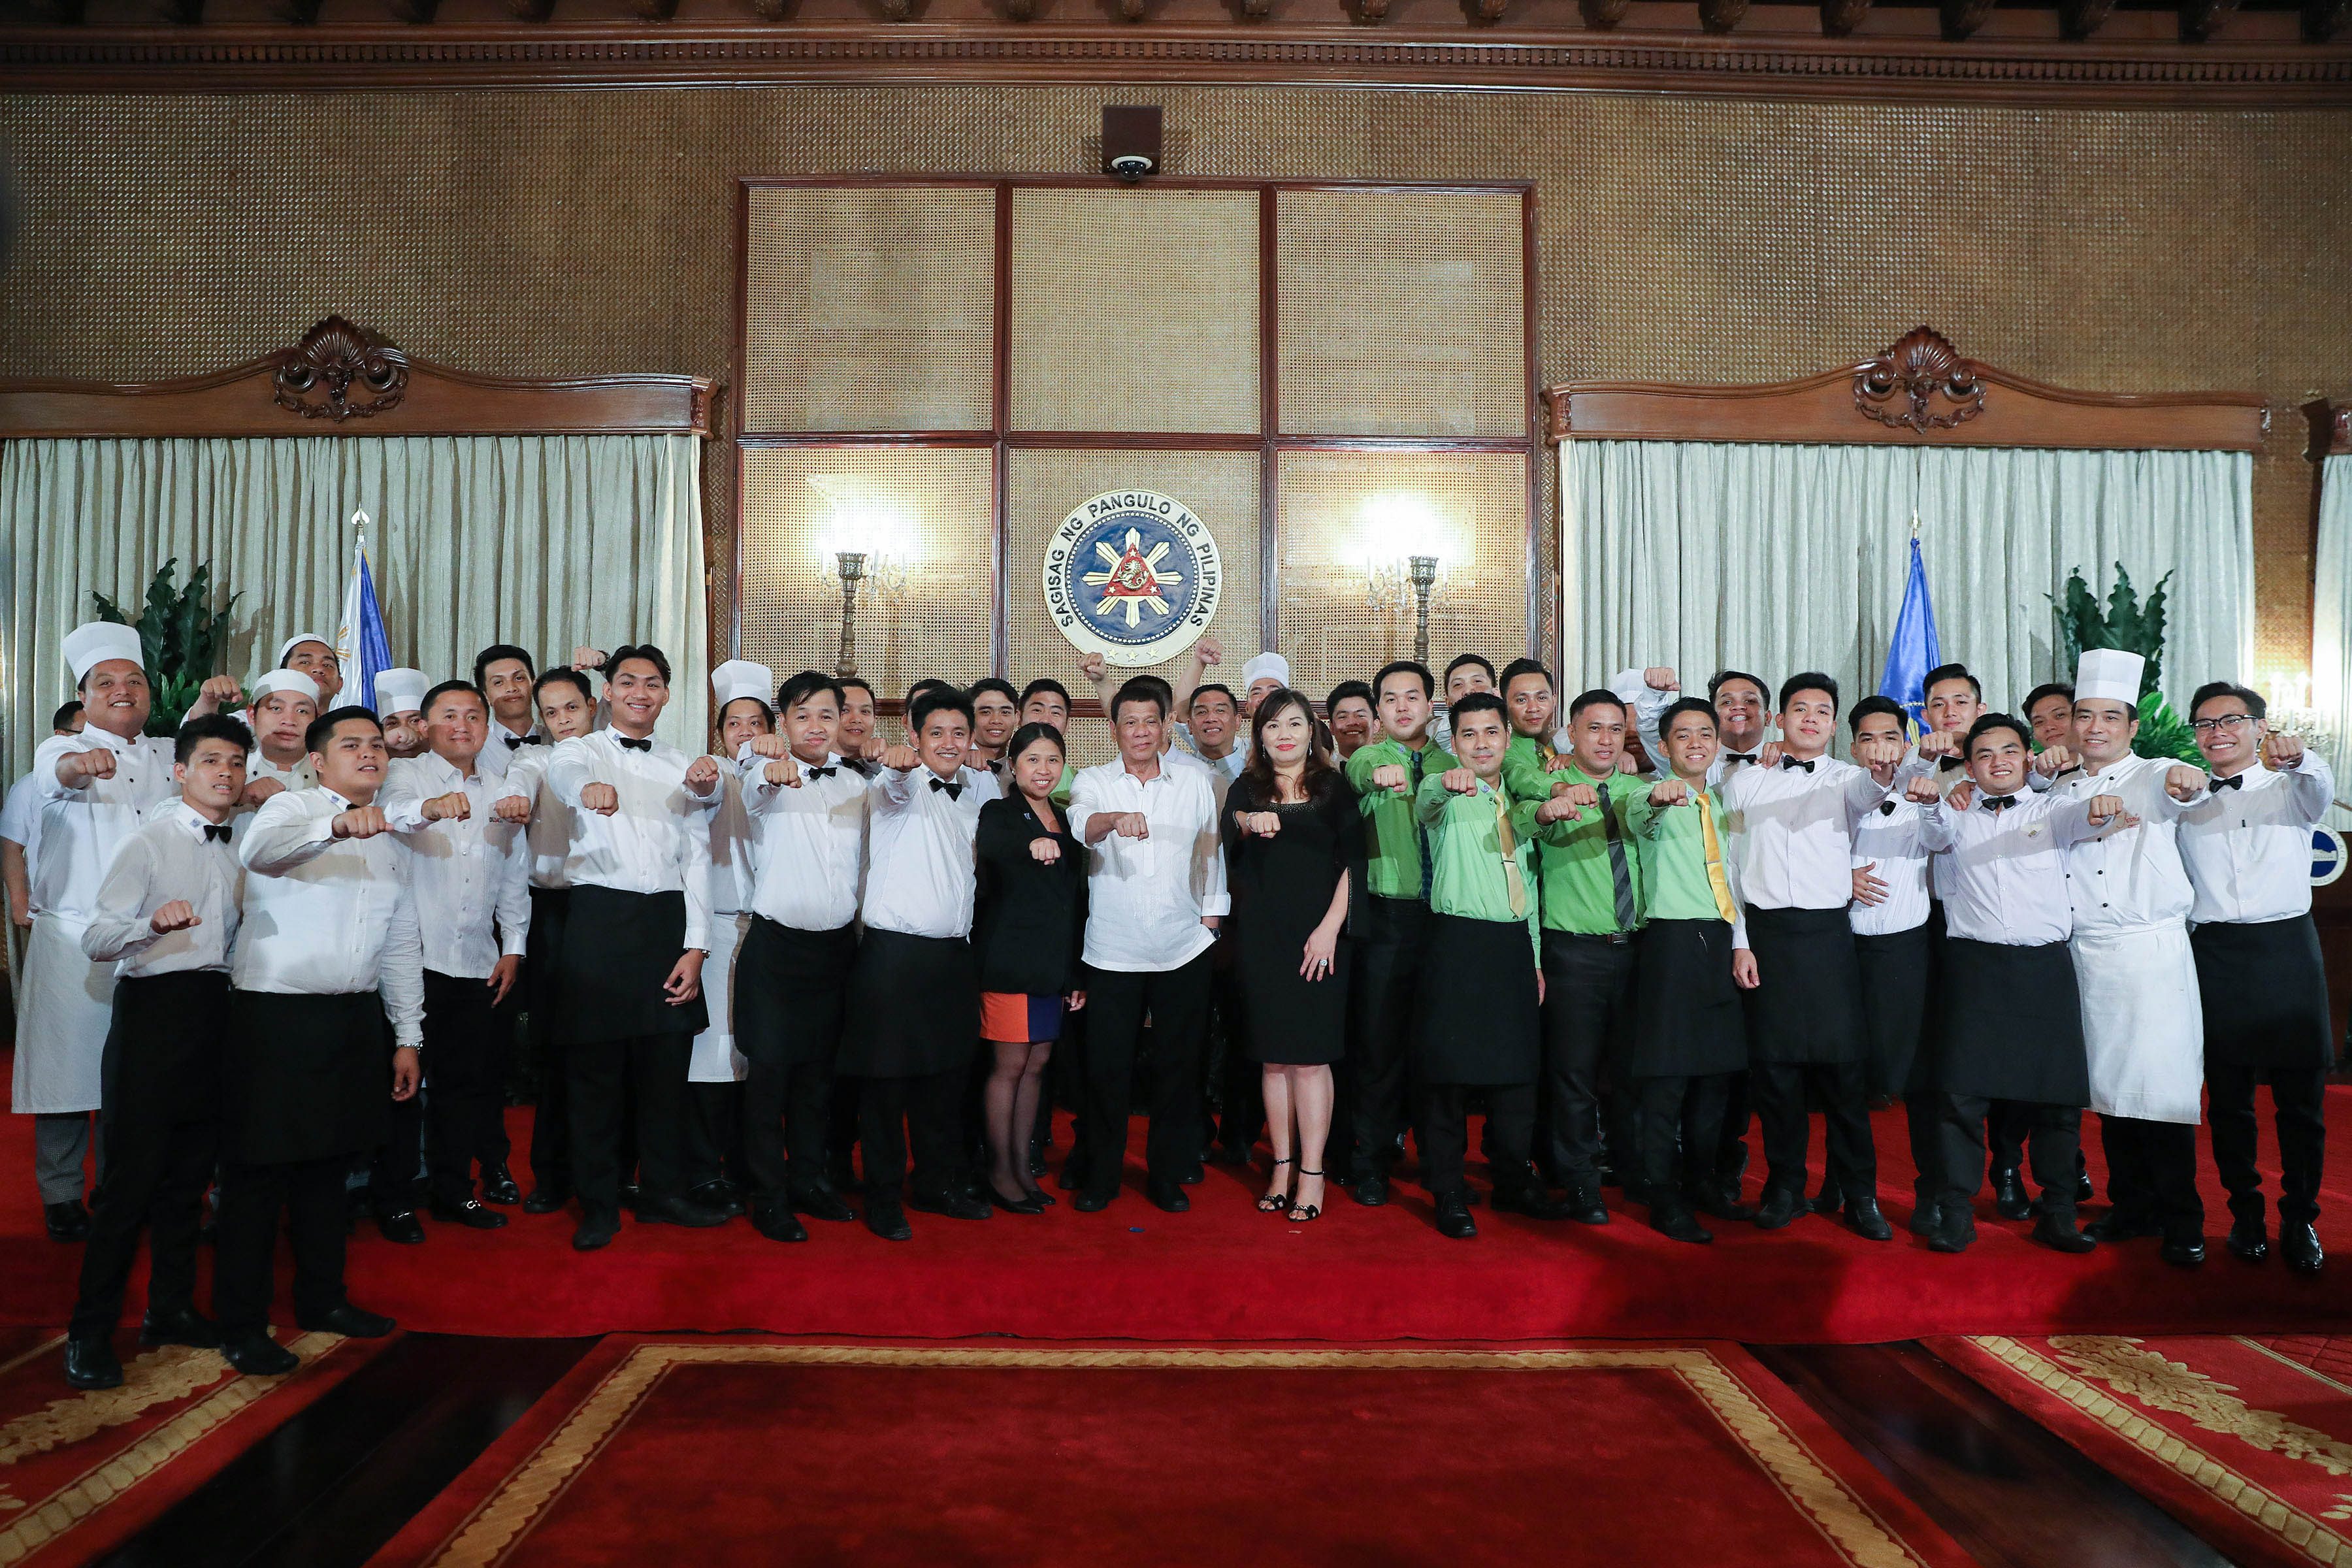 President Rodrigo Roa Duterte and his long-time partner Cielito "Honeylet" Avanceña flash the President's signature pose with the catering service personnel who served during a dinner he hosted at the Malacañan Palace on May 7, 2019. Photo by Valerie Escalera/Presidential Photo 